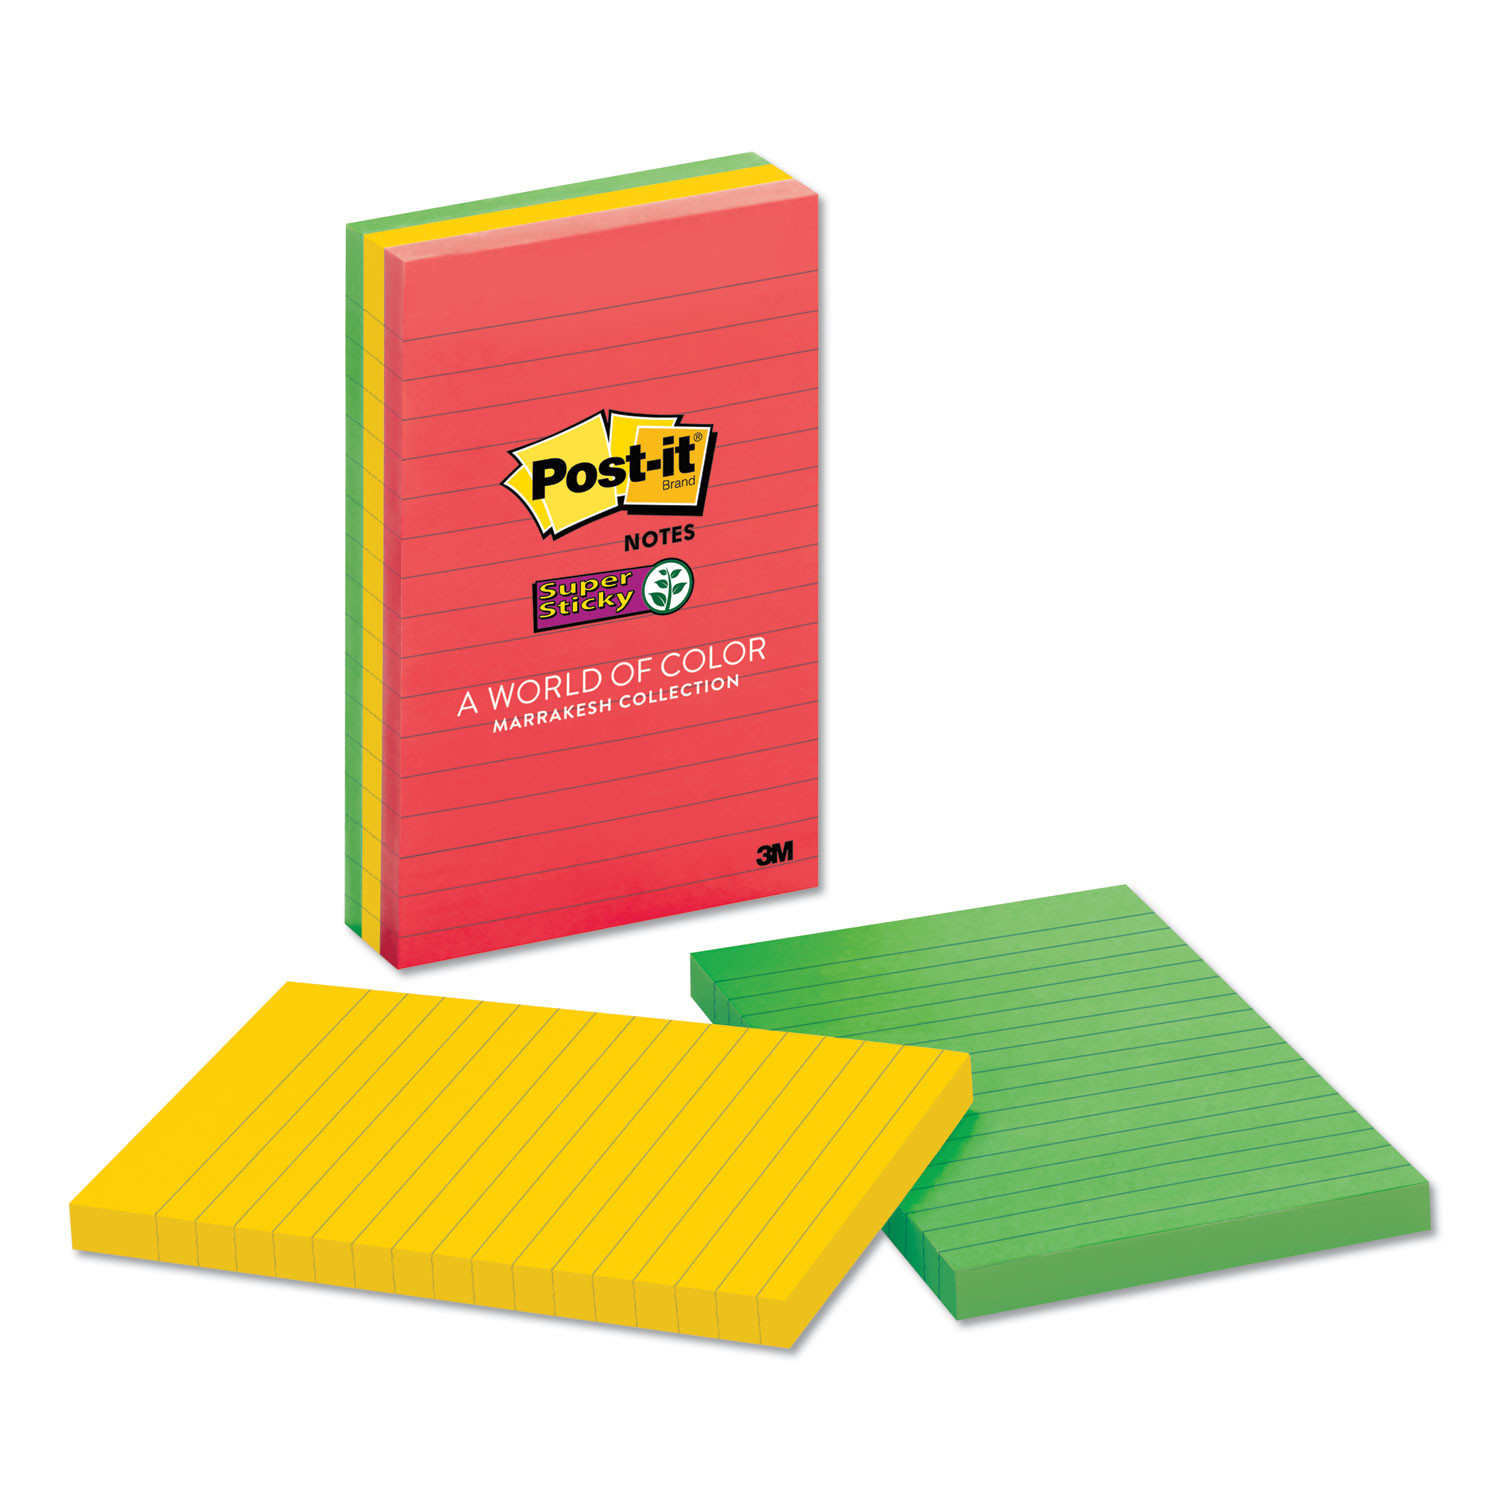 Post-it® Notes Super Sticky Pads in Playful Primary Collection